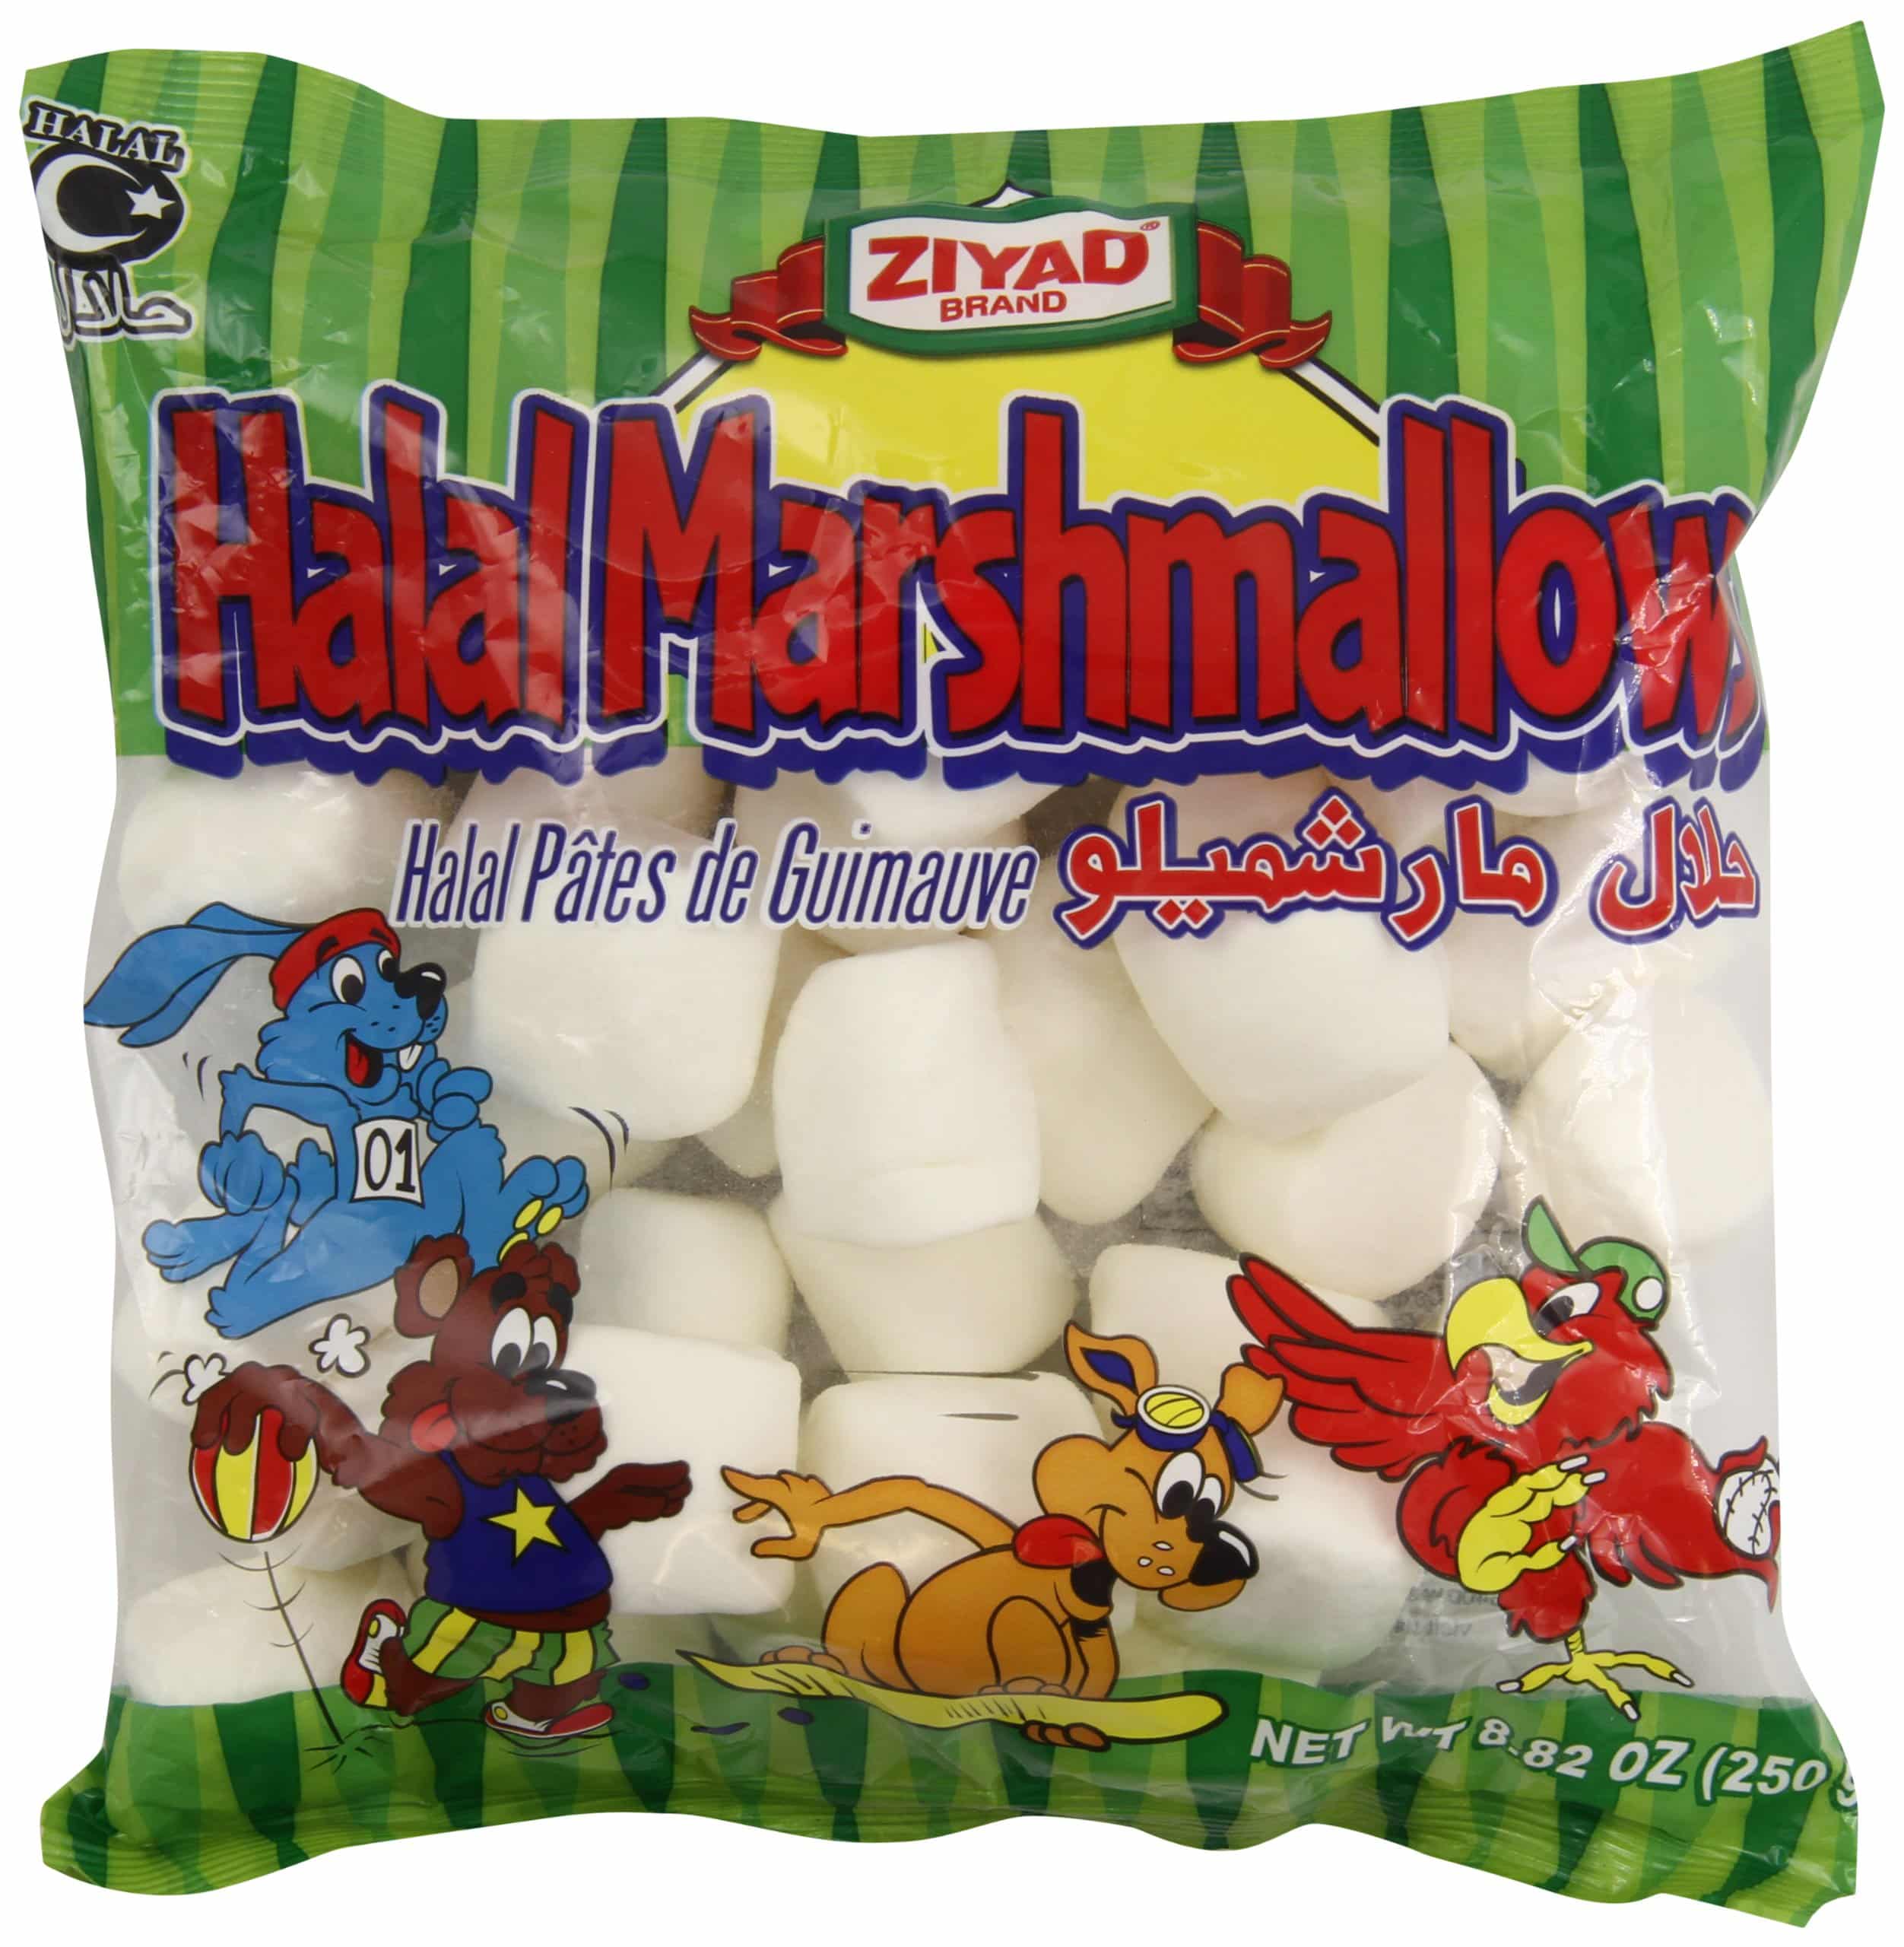 Halal In Japan - These Marshmallows are Halal certified from Spain